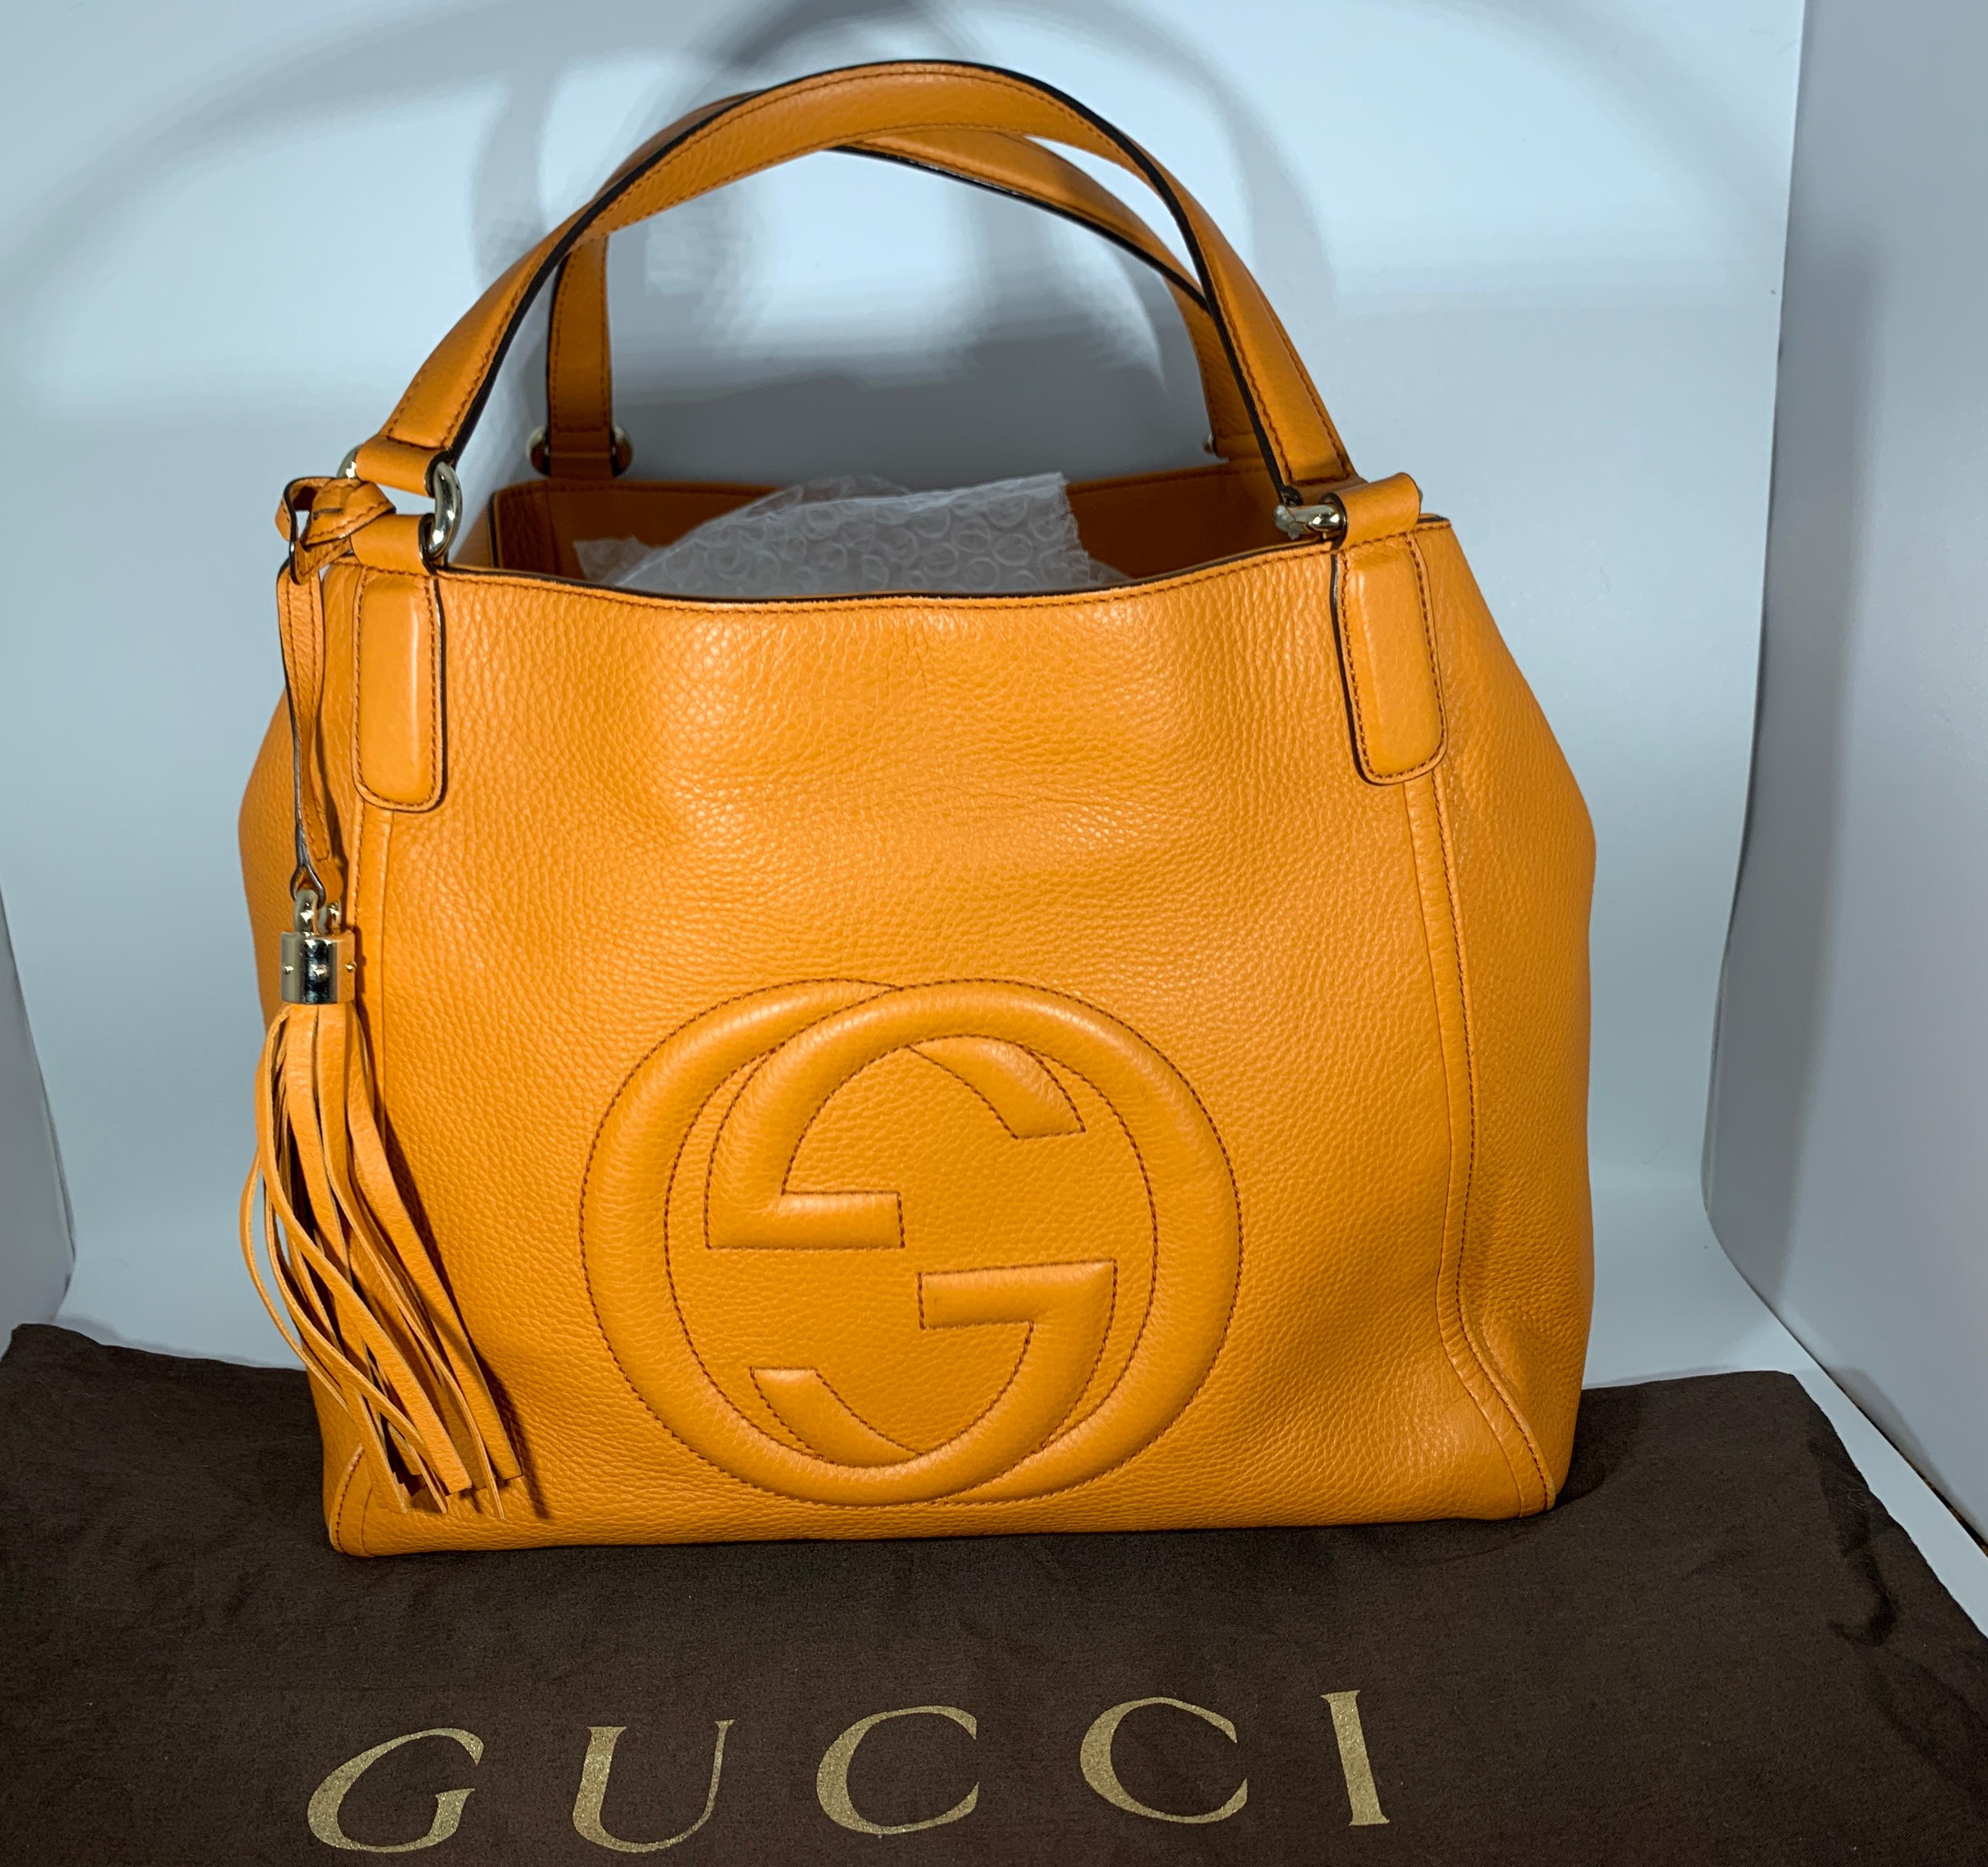 This chic tote is crafted of lovely fine grained calfskin leather in orange with an interlocking embossed GG logo. The bag features leather shoulder straps and a dangling leather tassel with a light gold cap. The top is open to a spacious natural